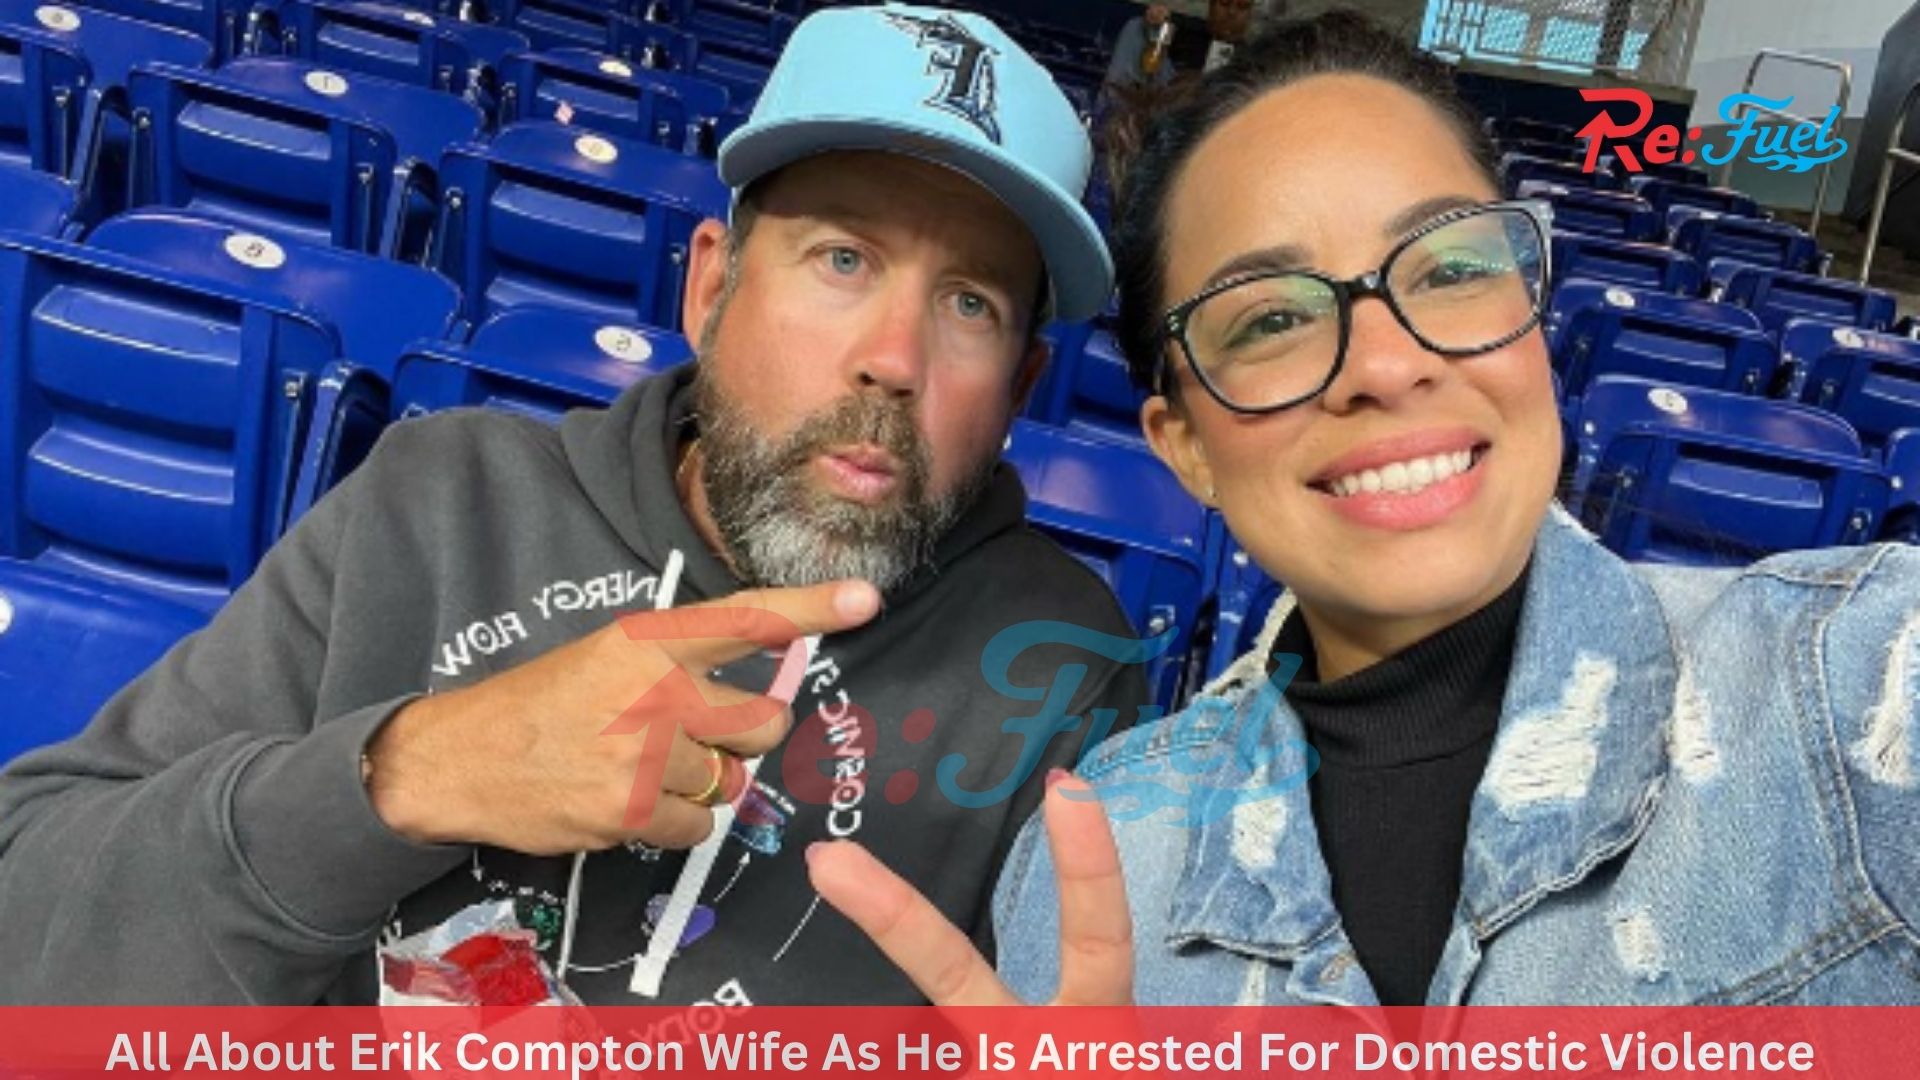 All About Erik Compton Wife As He Is Arrested For Domestic Violence